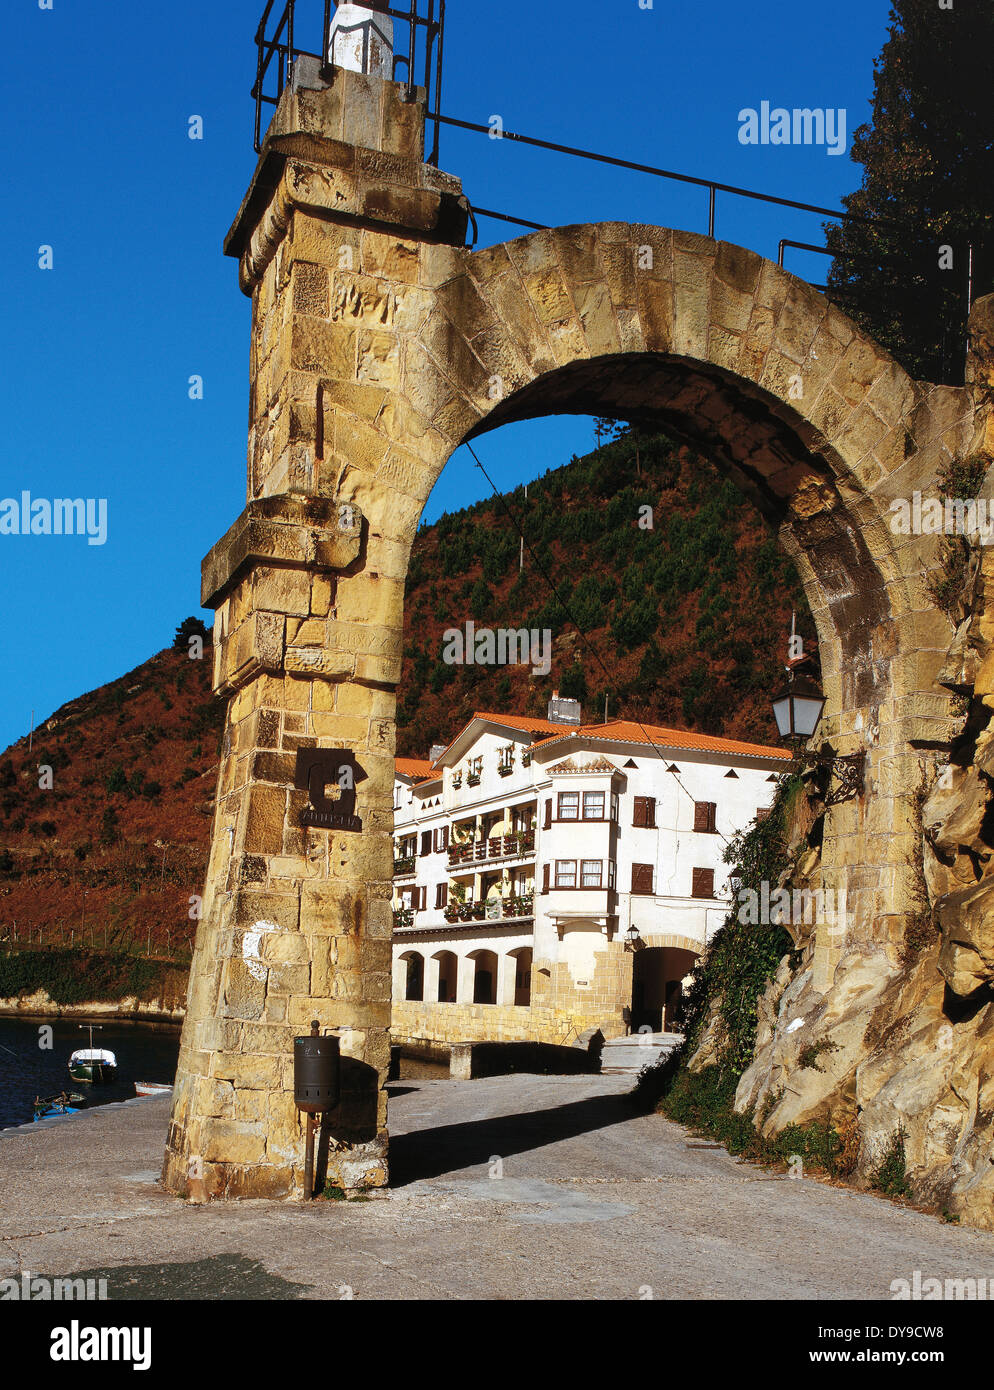 Spain. Basque Country. Pasaia. Gate of the old wall. Stock Photo